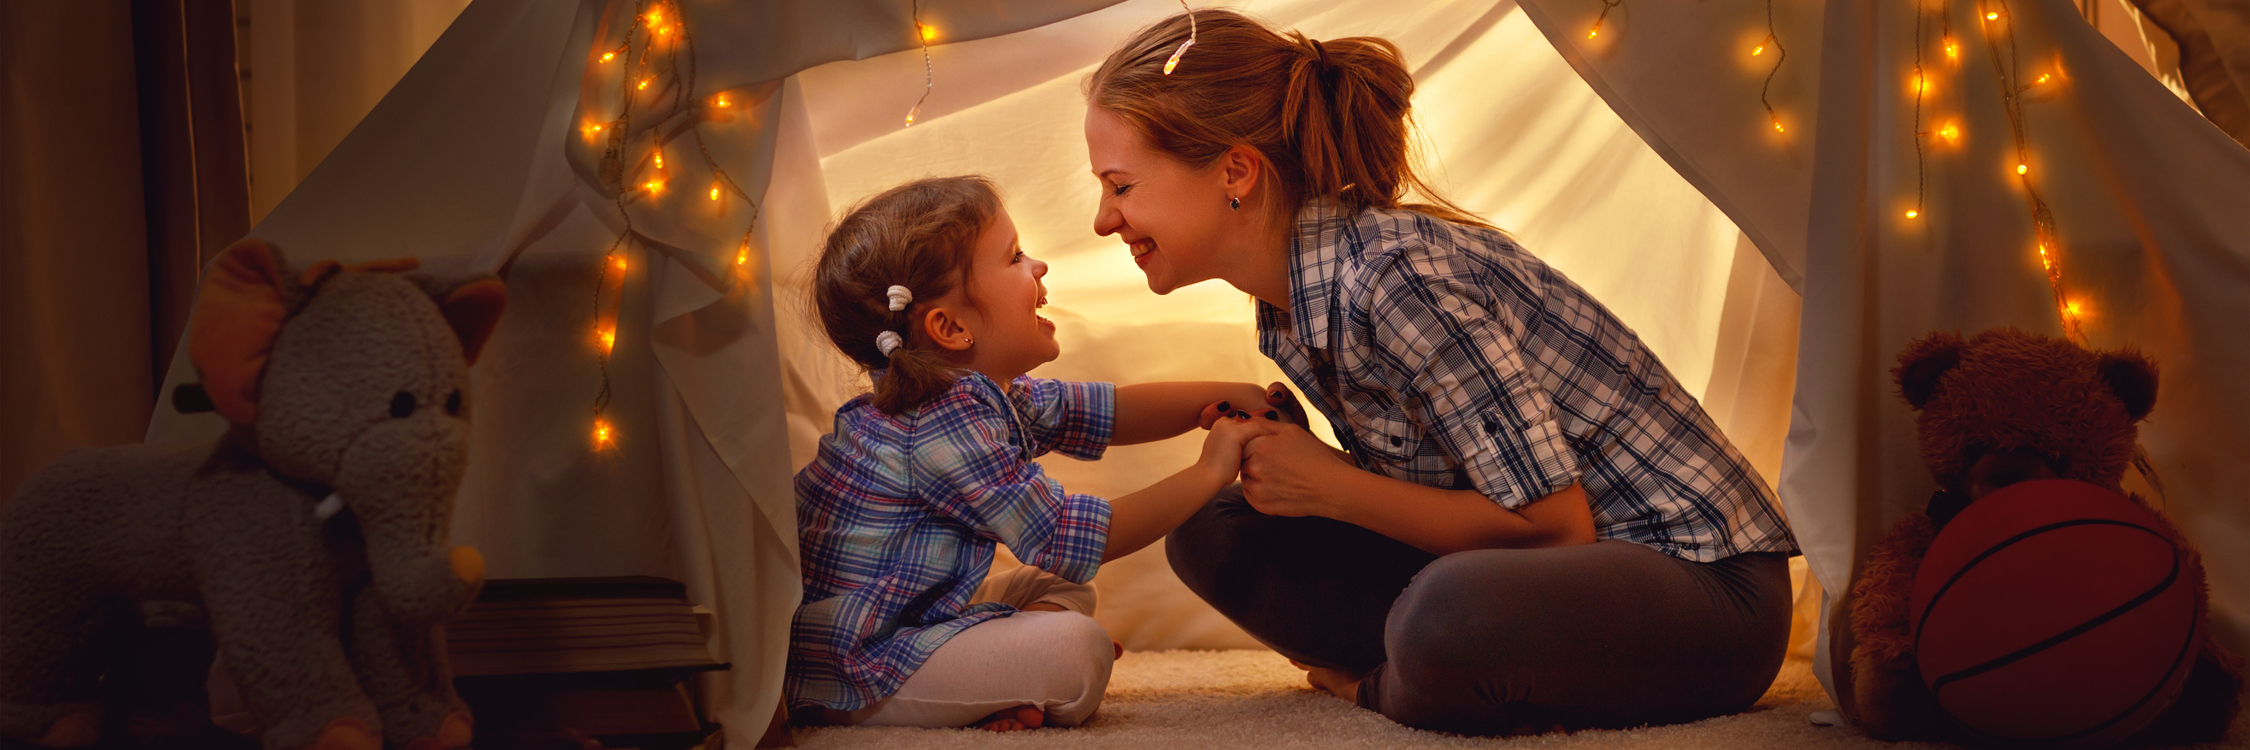 A mother and daughter under an indoor tent with lights.